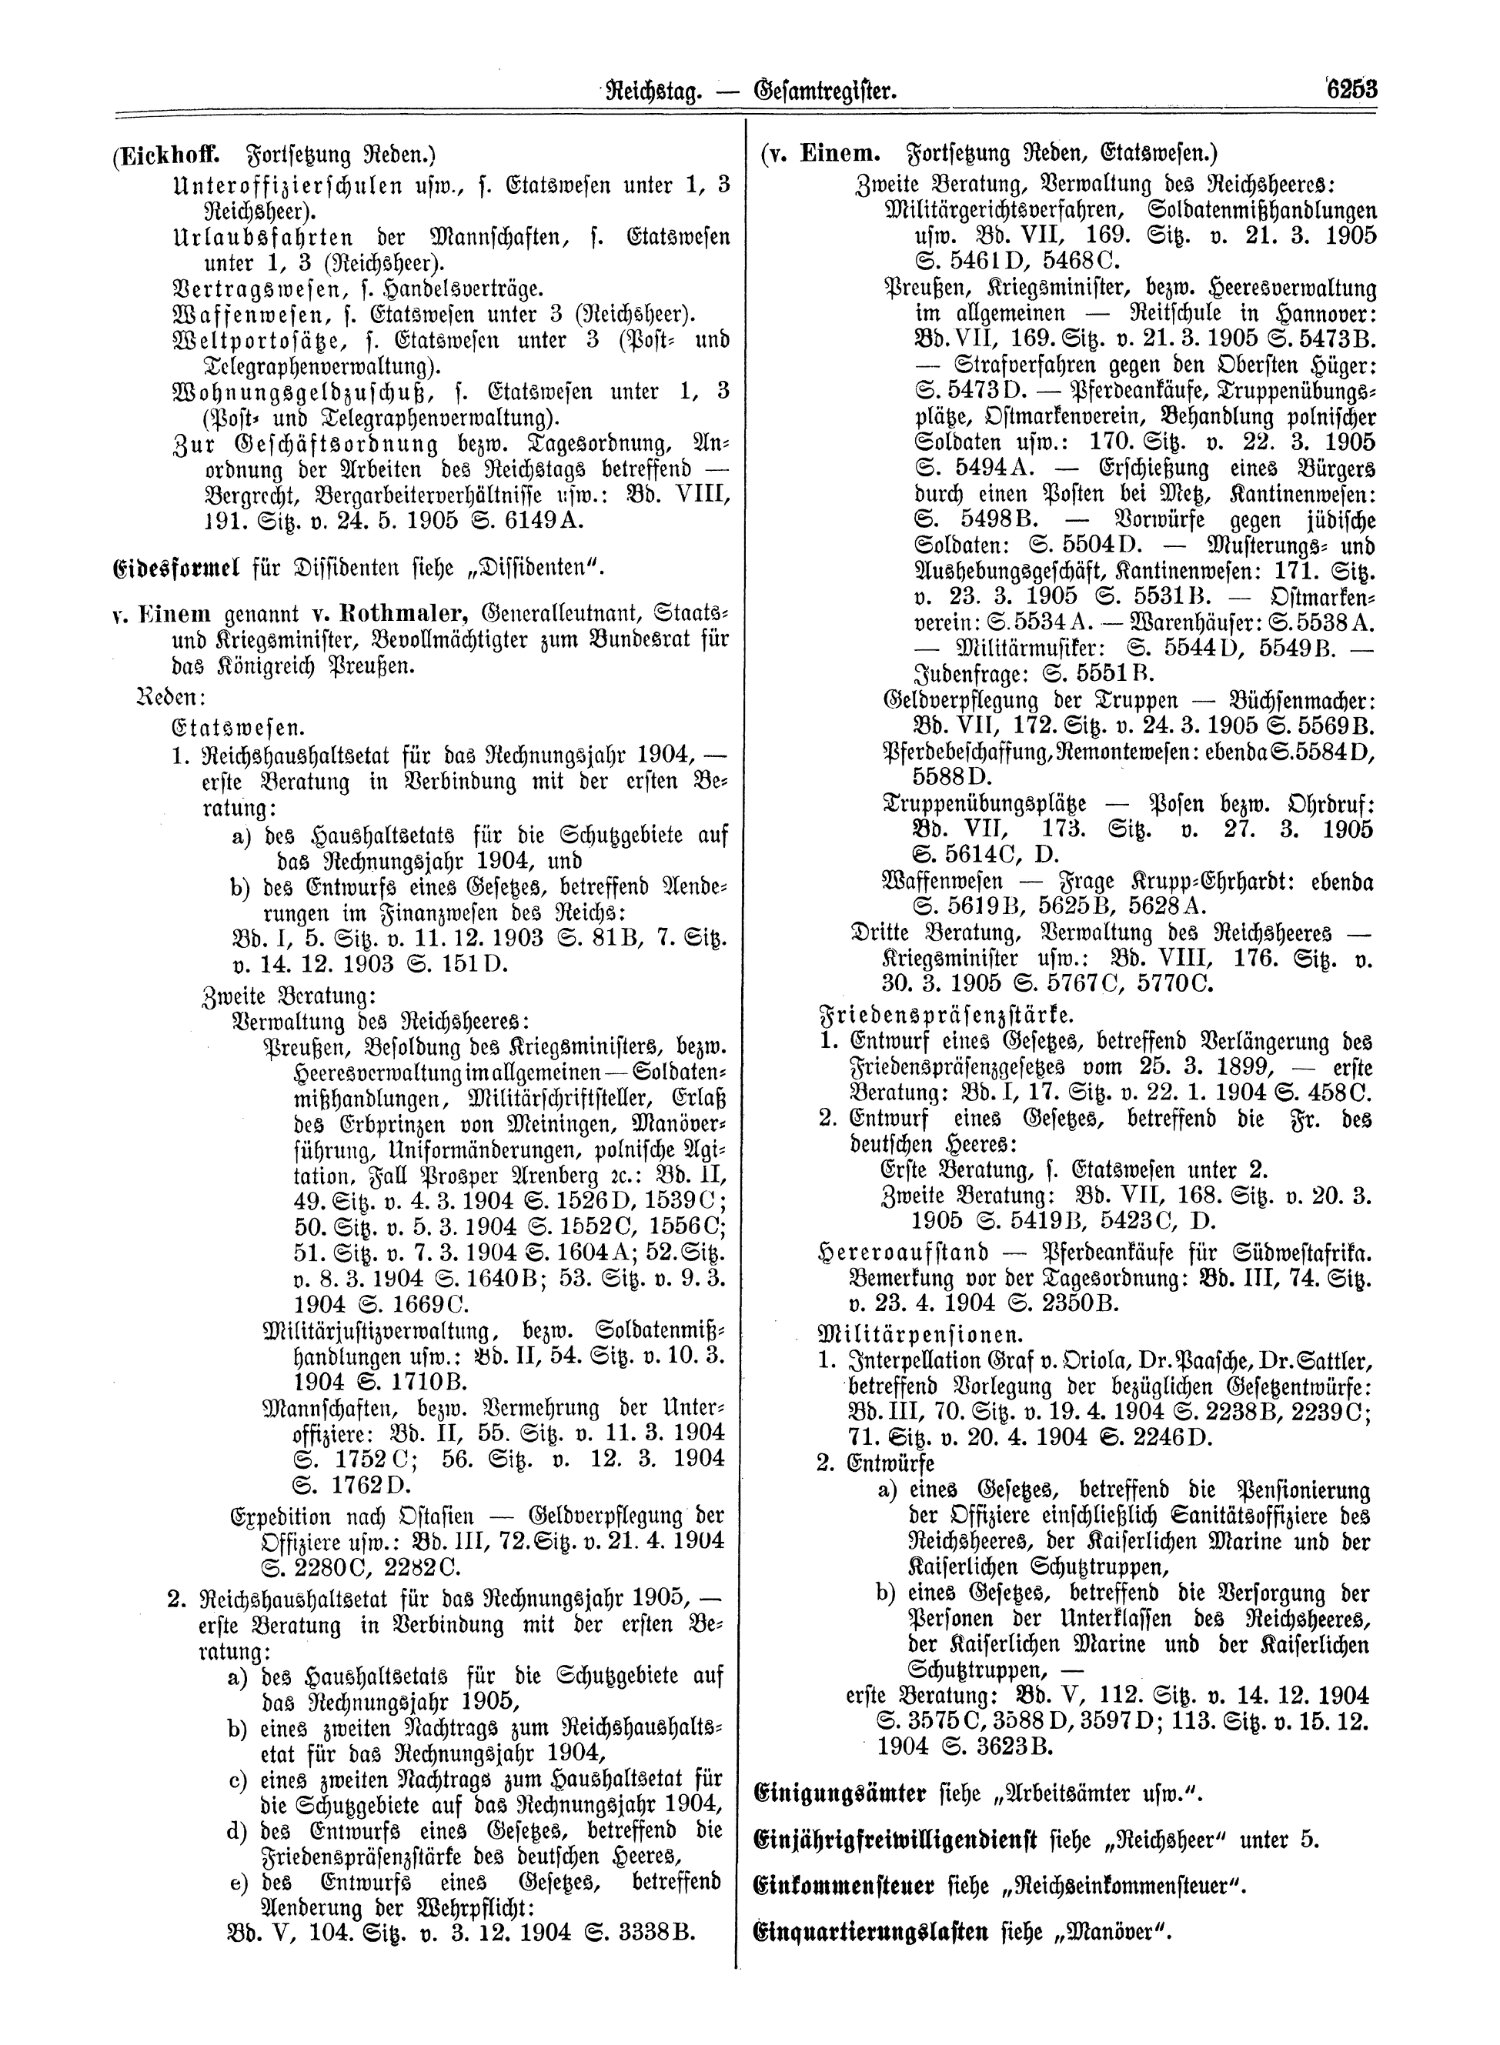 Scan of page 6253